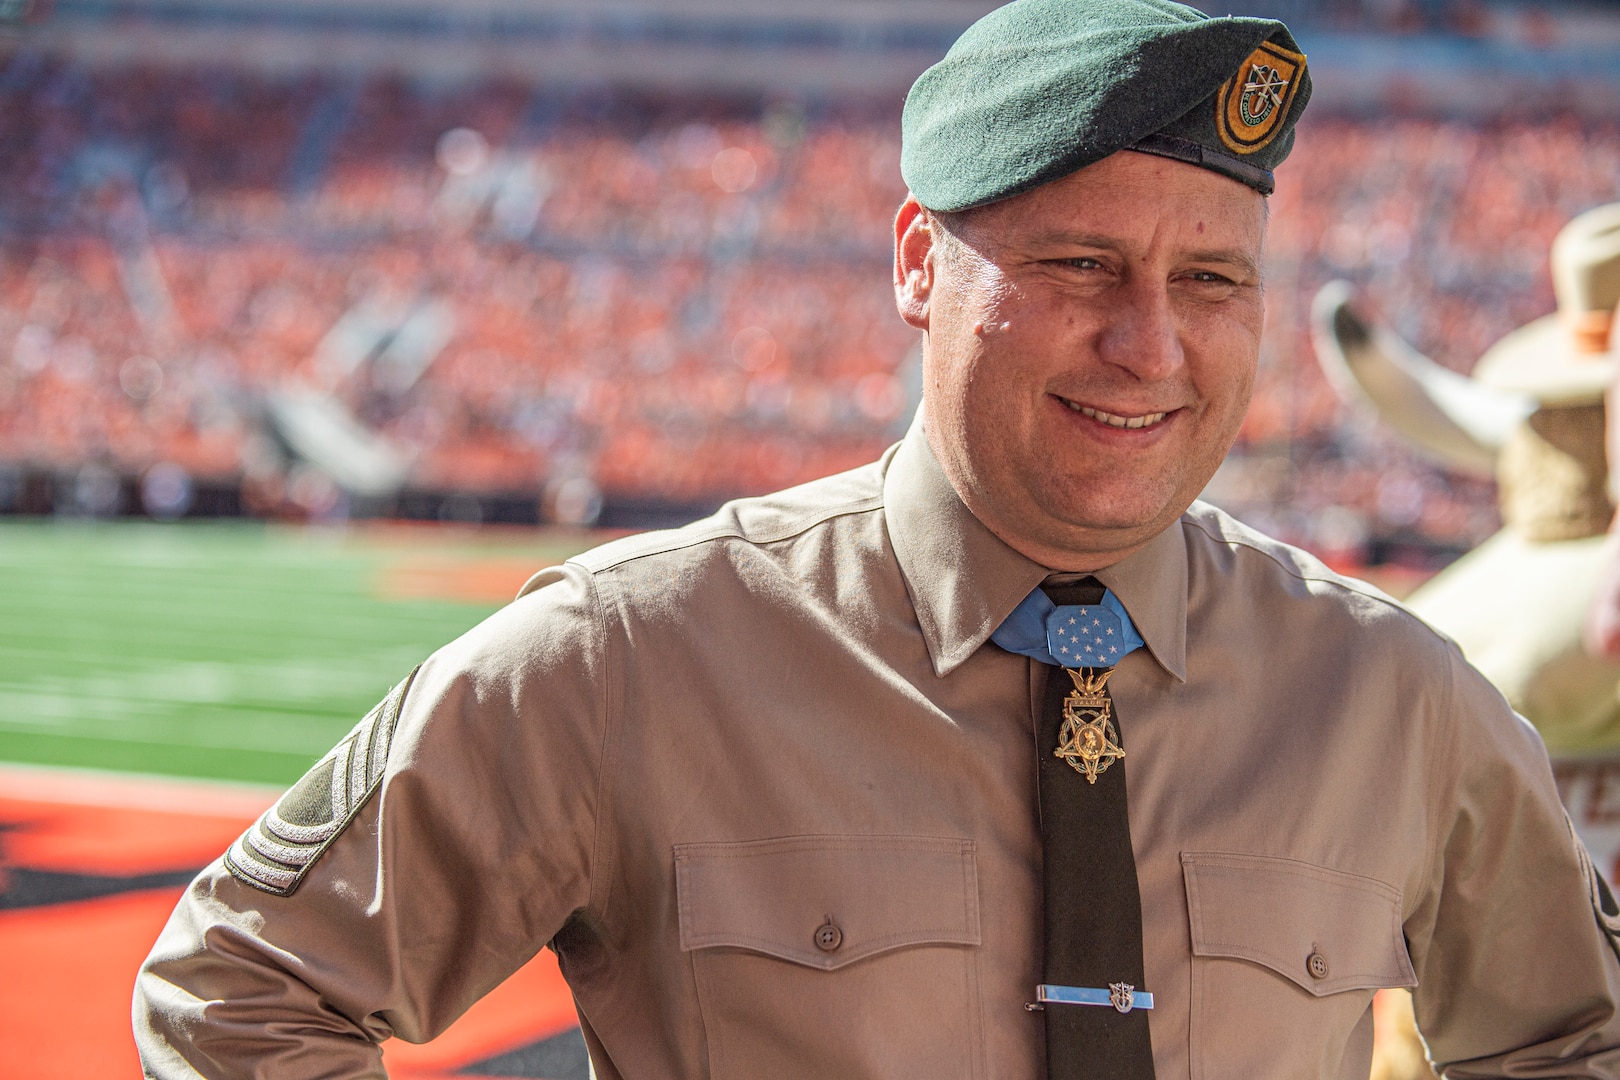 Master Sgt. Earl Plumlee, a Medal of Honor recipient, takes part in pregame activities at the Oklahoma State University homecoming football game in Stillwater, Oklahoma, Oct. 22, 2022. Plumlee, a native Oklahoman, is a former Oklahoma National Guard Soldier.